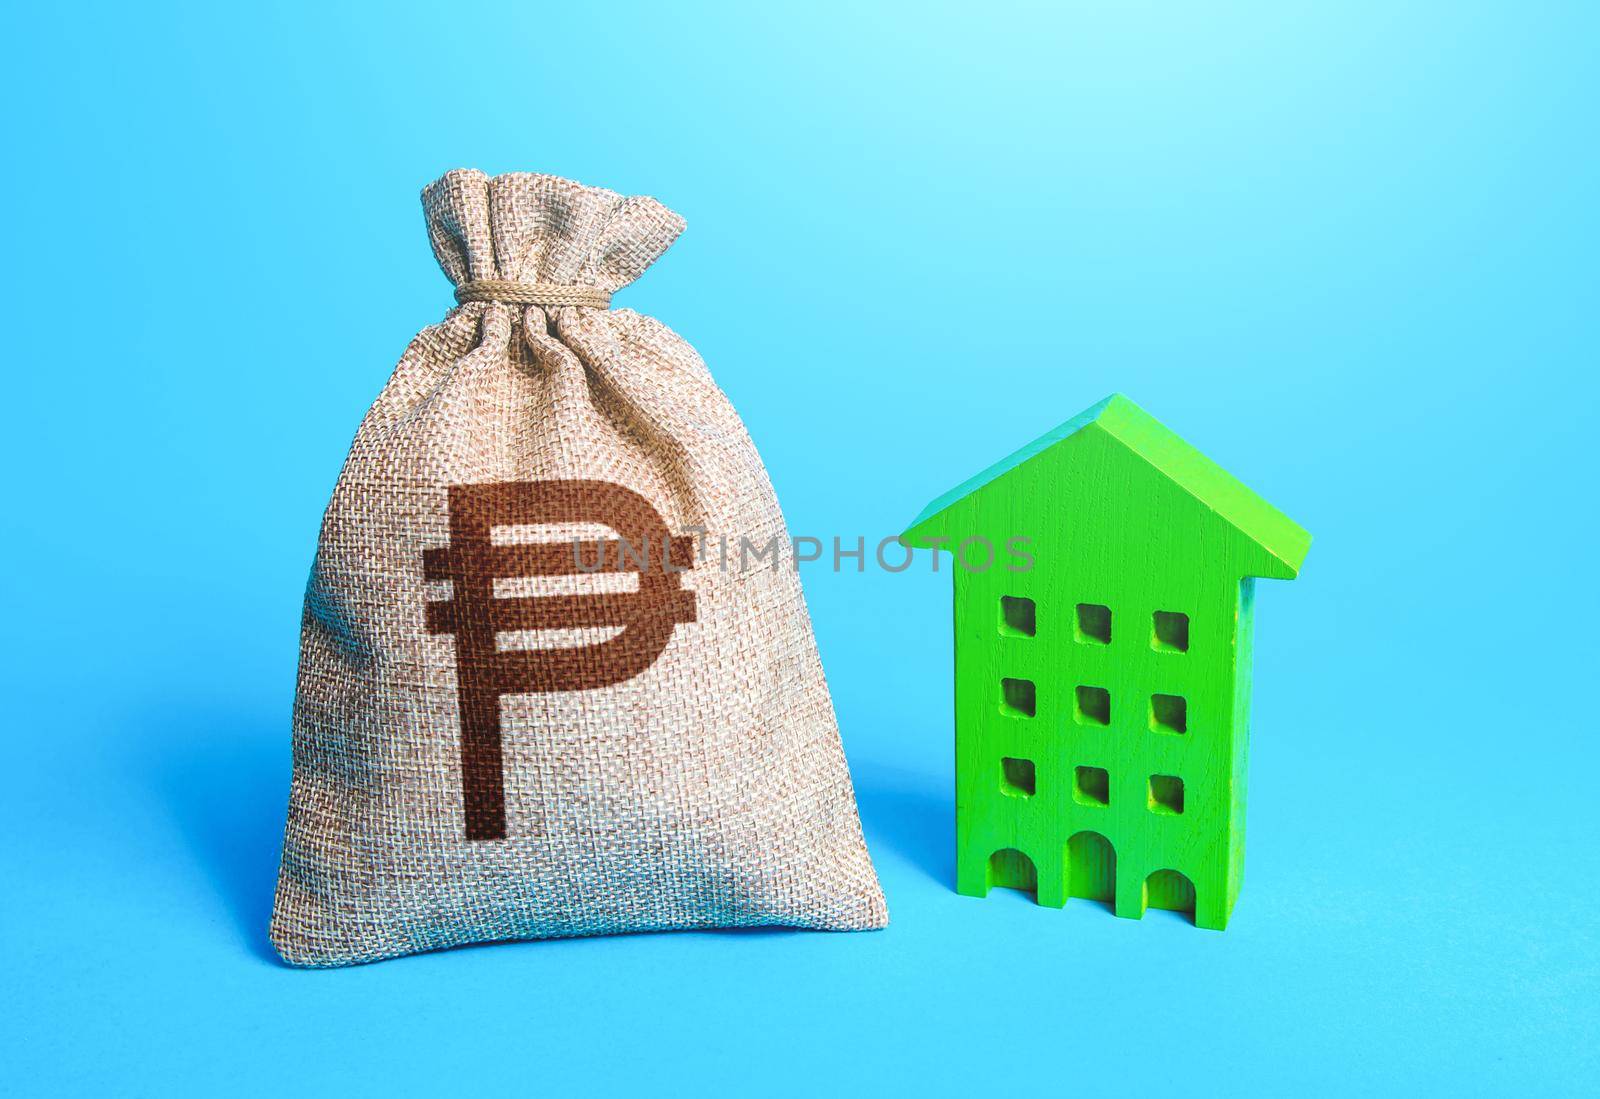 Philippine peso money bag and green Investments in sustainable housing. Investment in green technologies. Reduced emissions, improved energy efficiency. Reducing impact on environment.